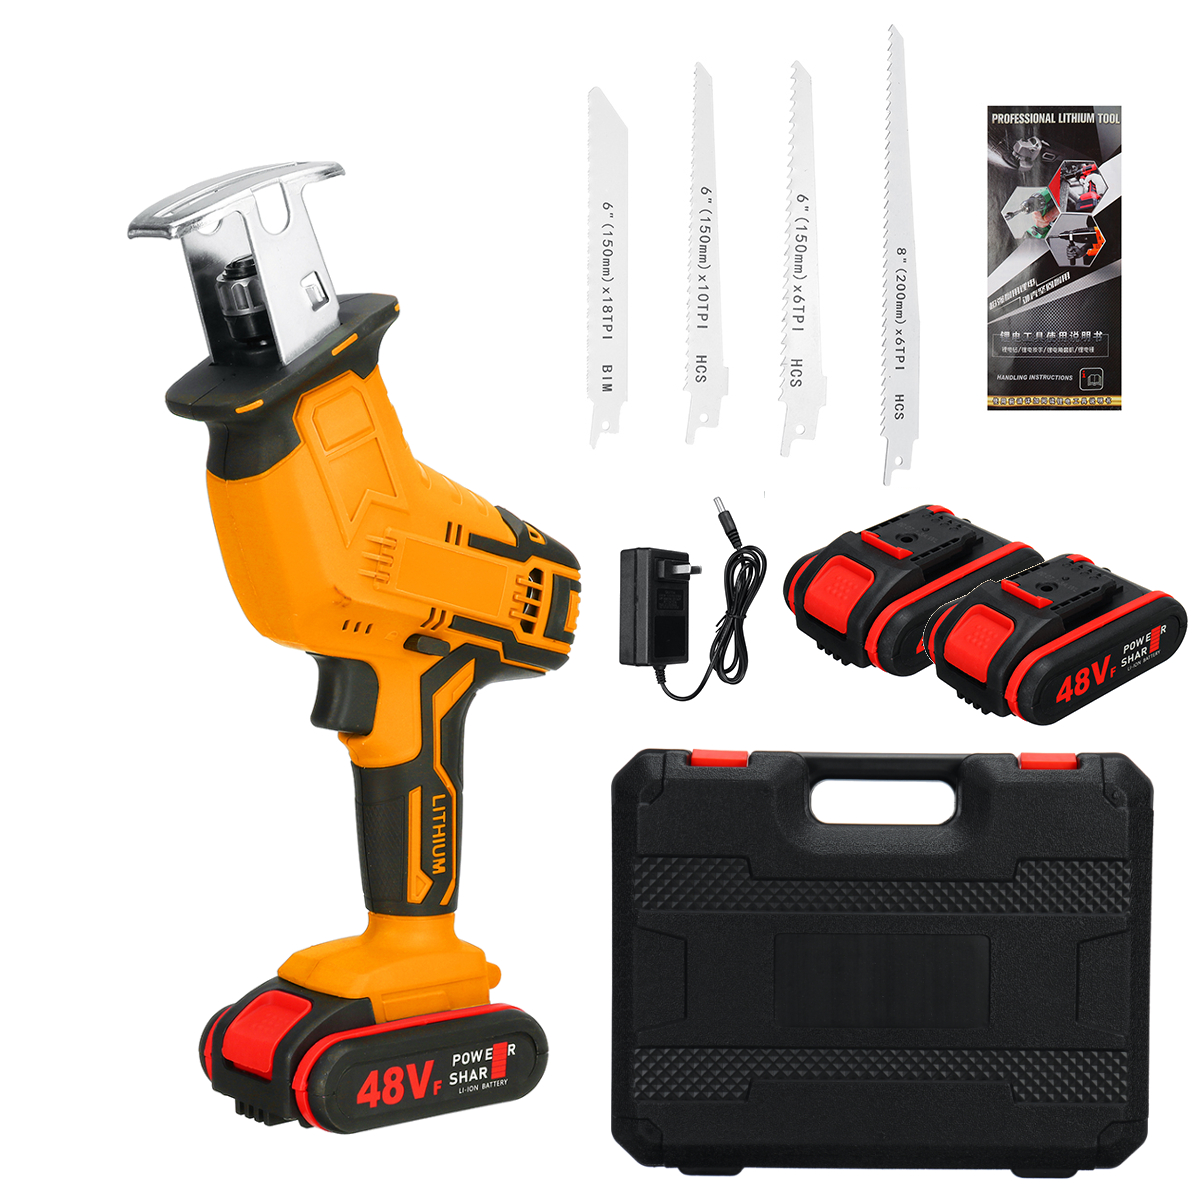 48V-Cordless-Reciprocating-Saw-With-Battery-Charger-recip-Sabre-Saw-New-Power-Tool-1734472-14